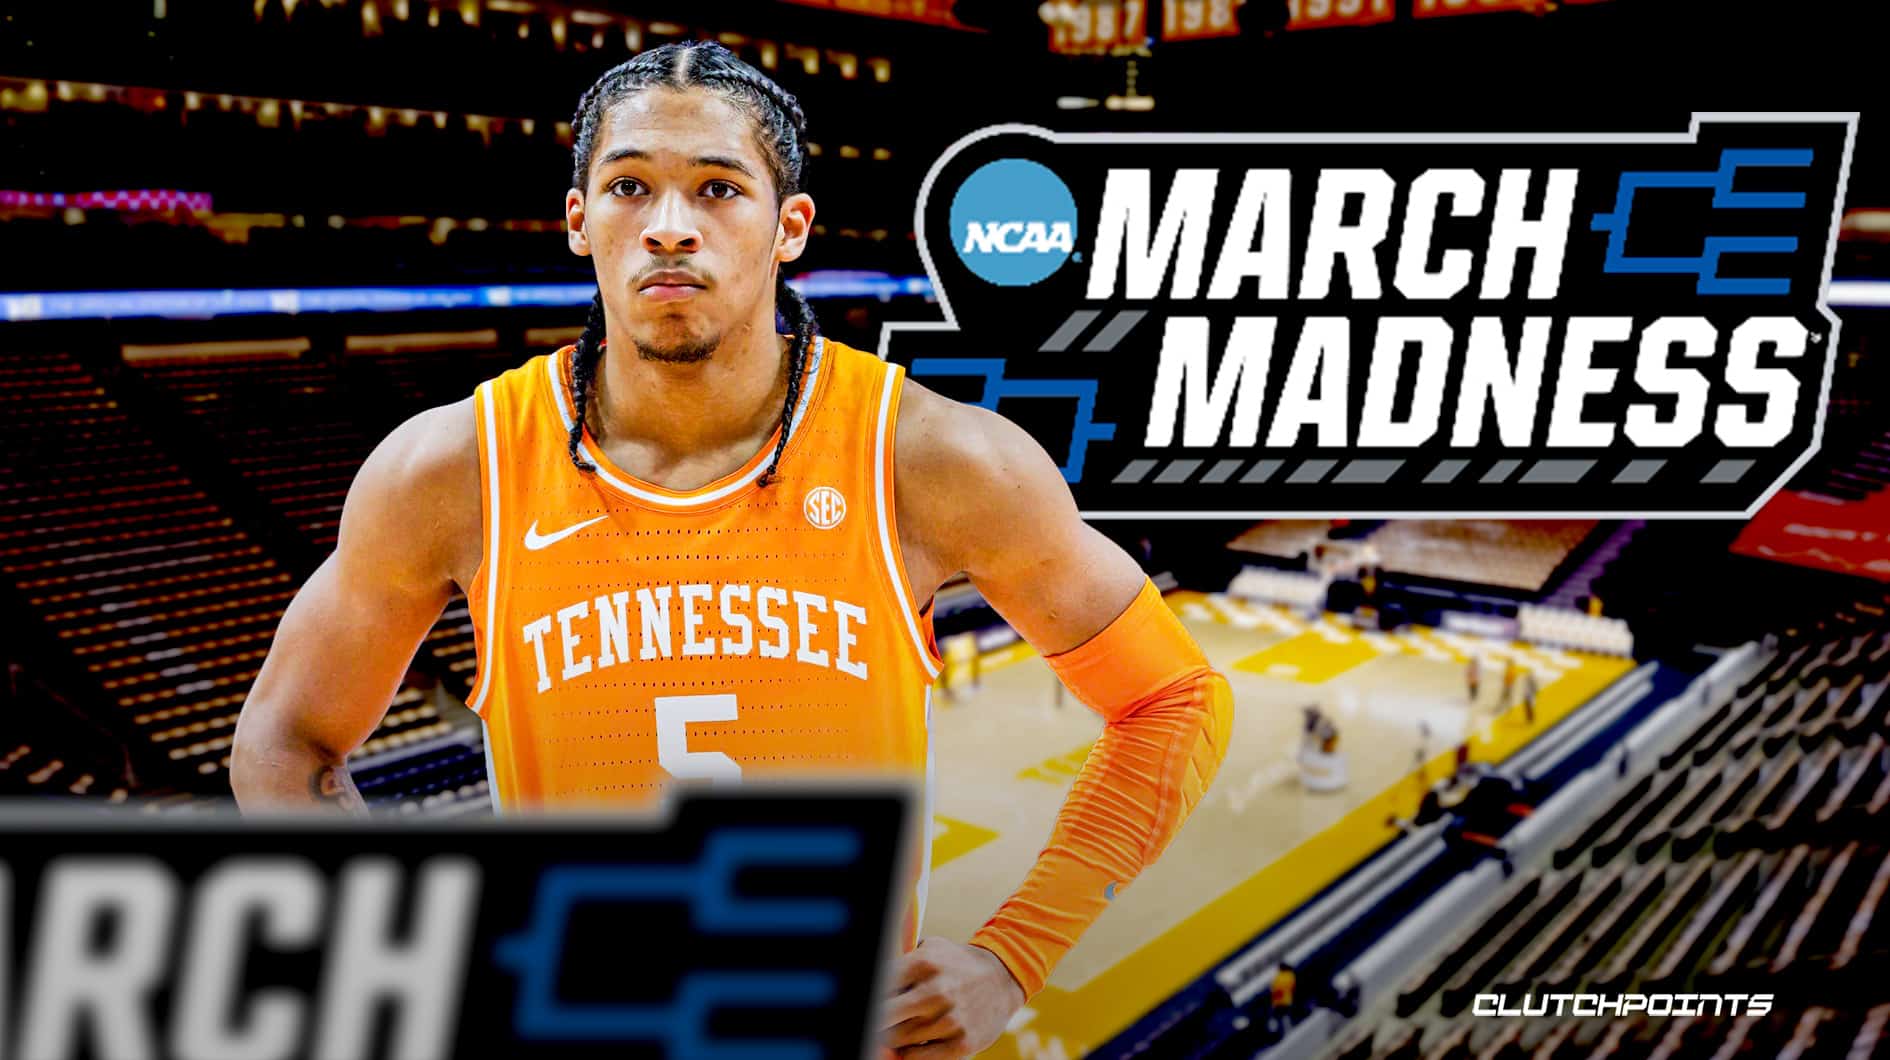 Tennessee Basketball Zakai Zeigler injured ahead of March Madness